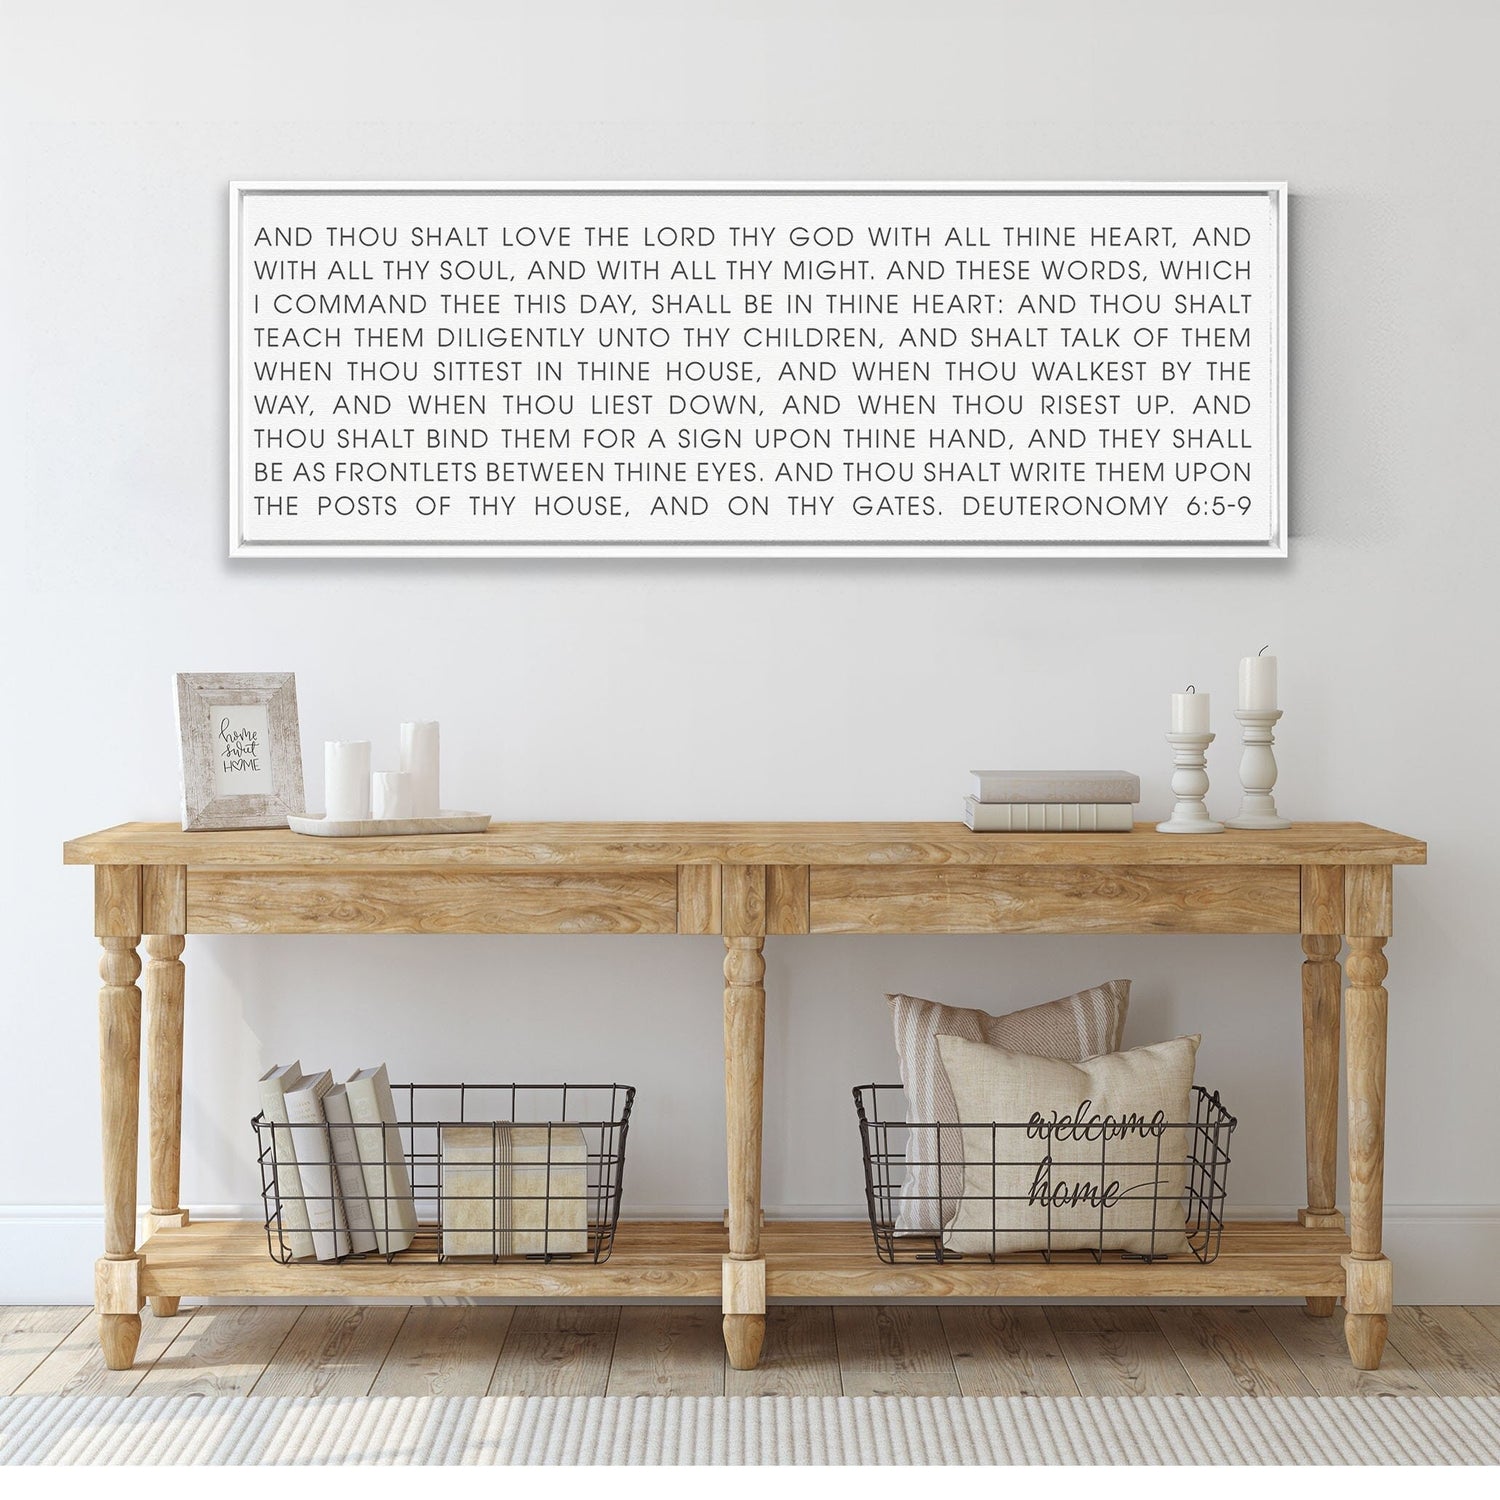 Love The Lord Thy God | Scripture Sign | SCRIPTURE WALL ART | | Large Home Bible Verse Sign With Frame Options | Deuteronomy 6:5-9